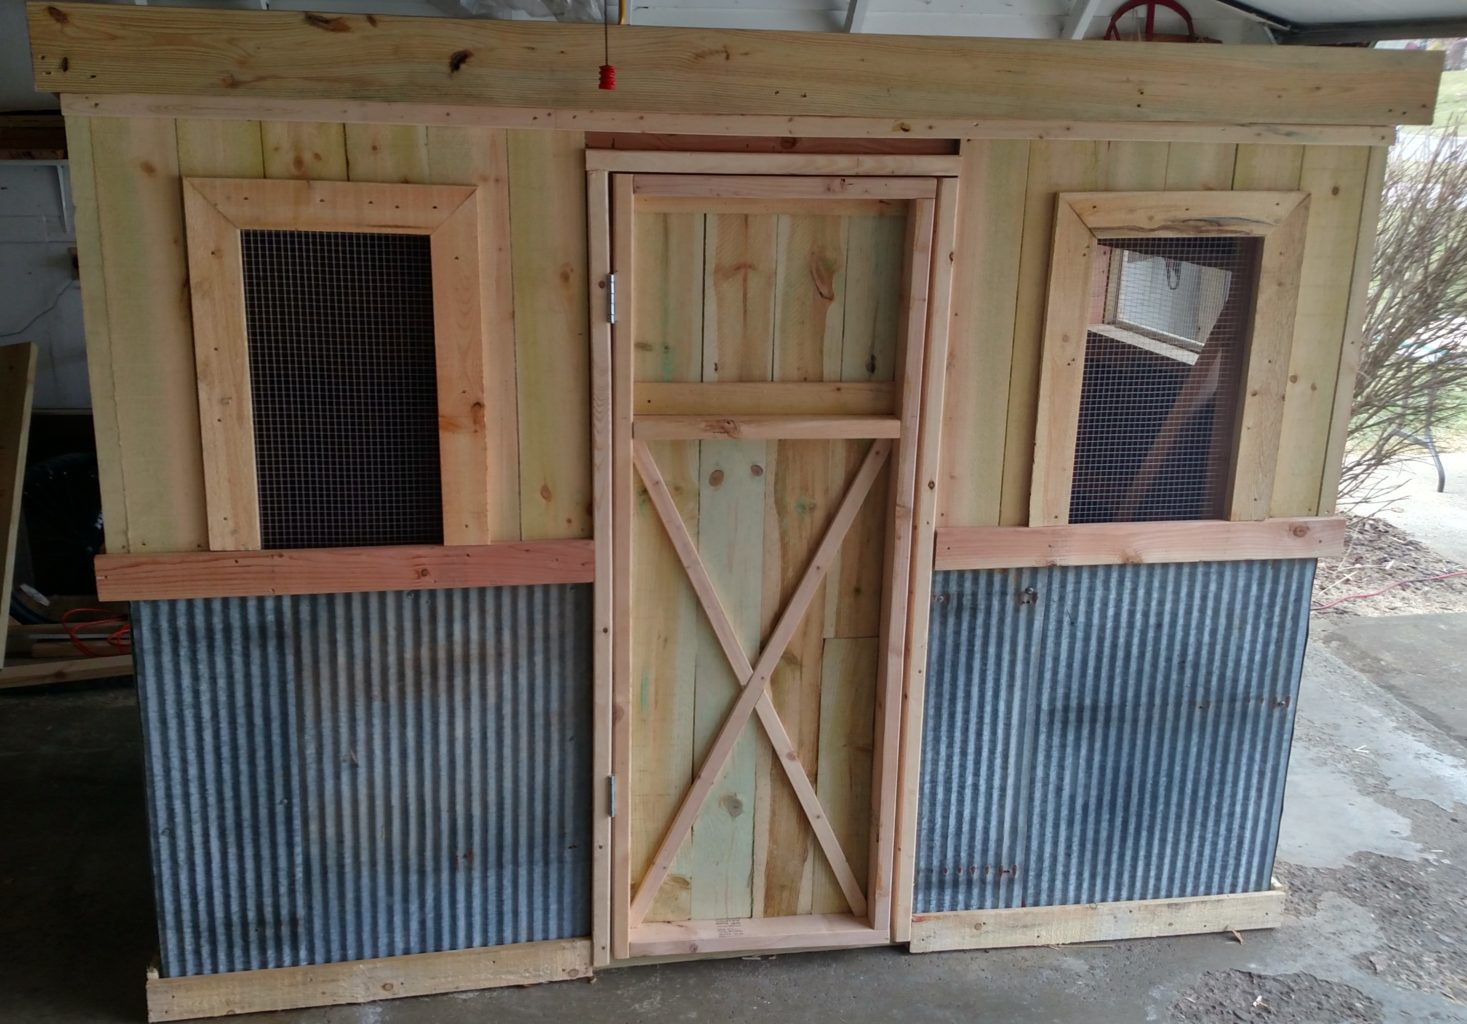 The Recycled Chicken Coop Pallet Project - Old World 